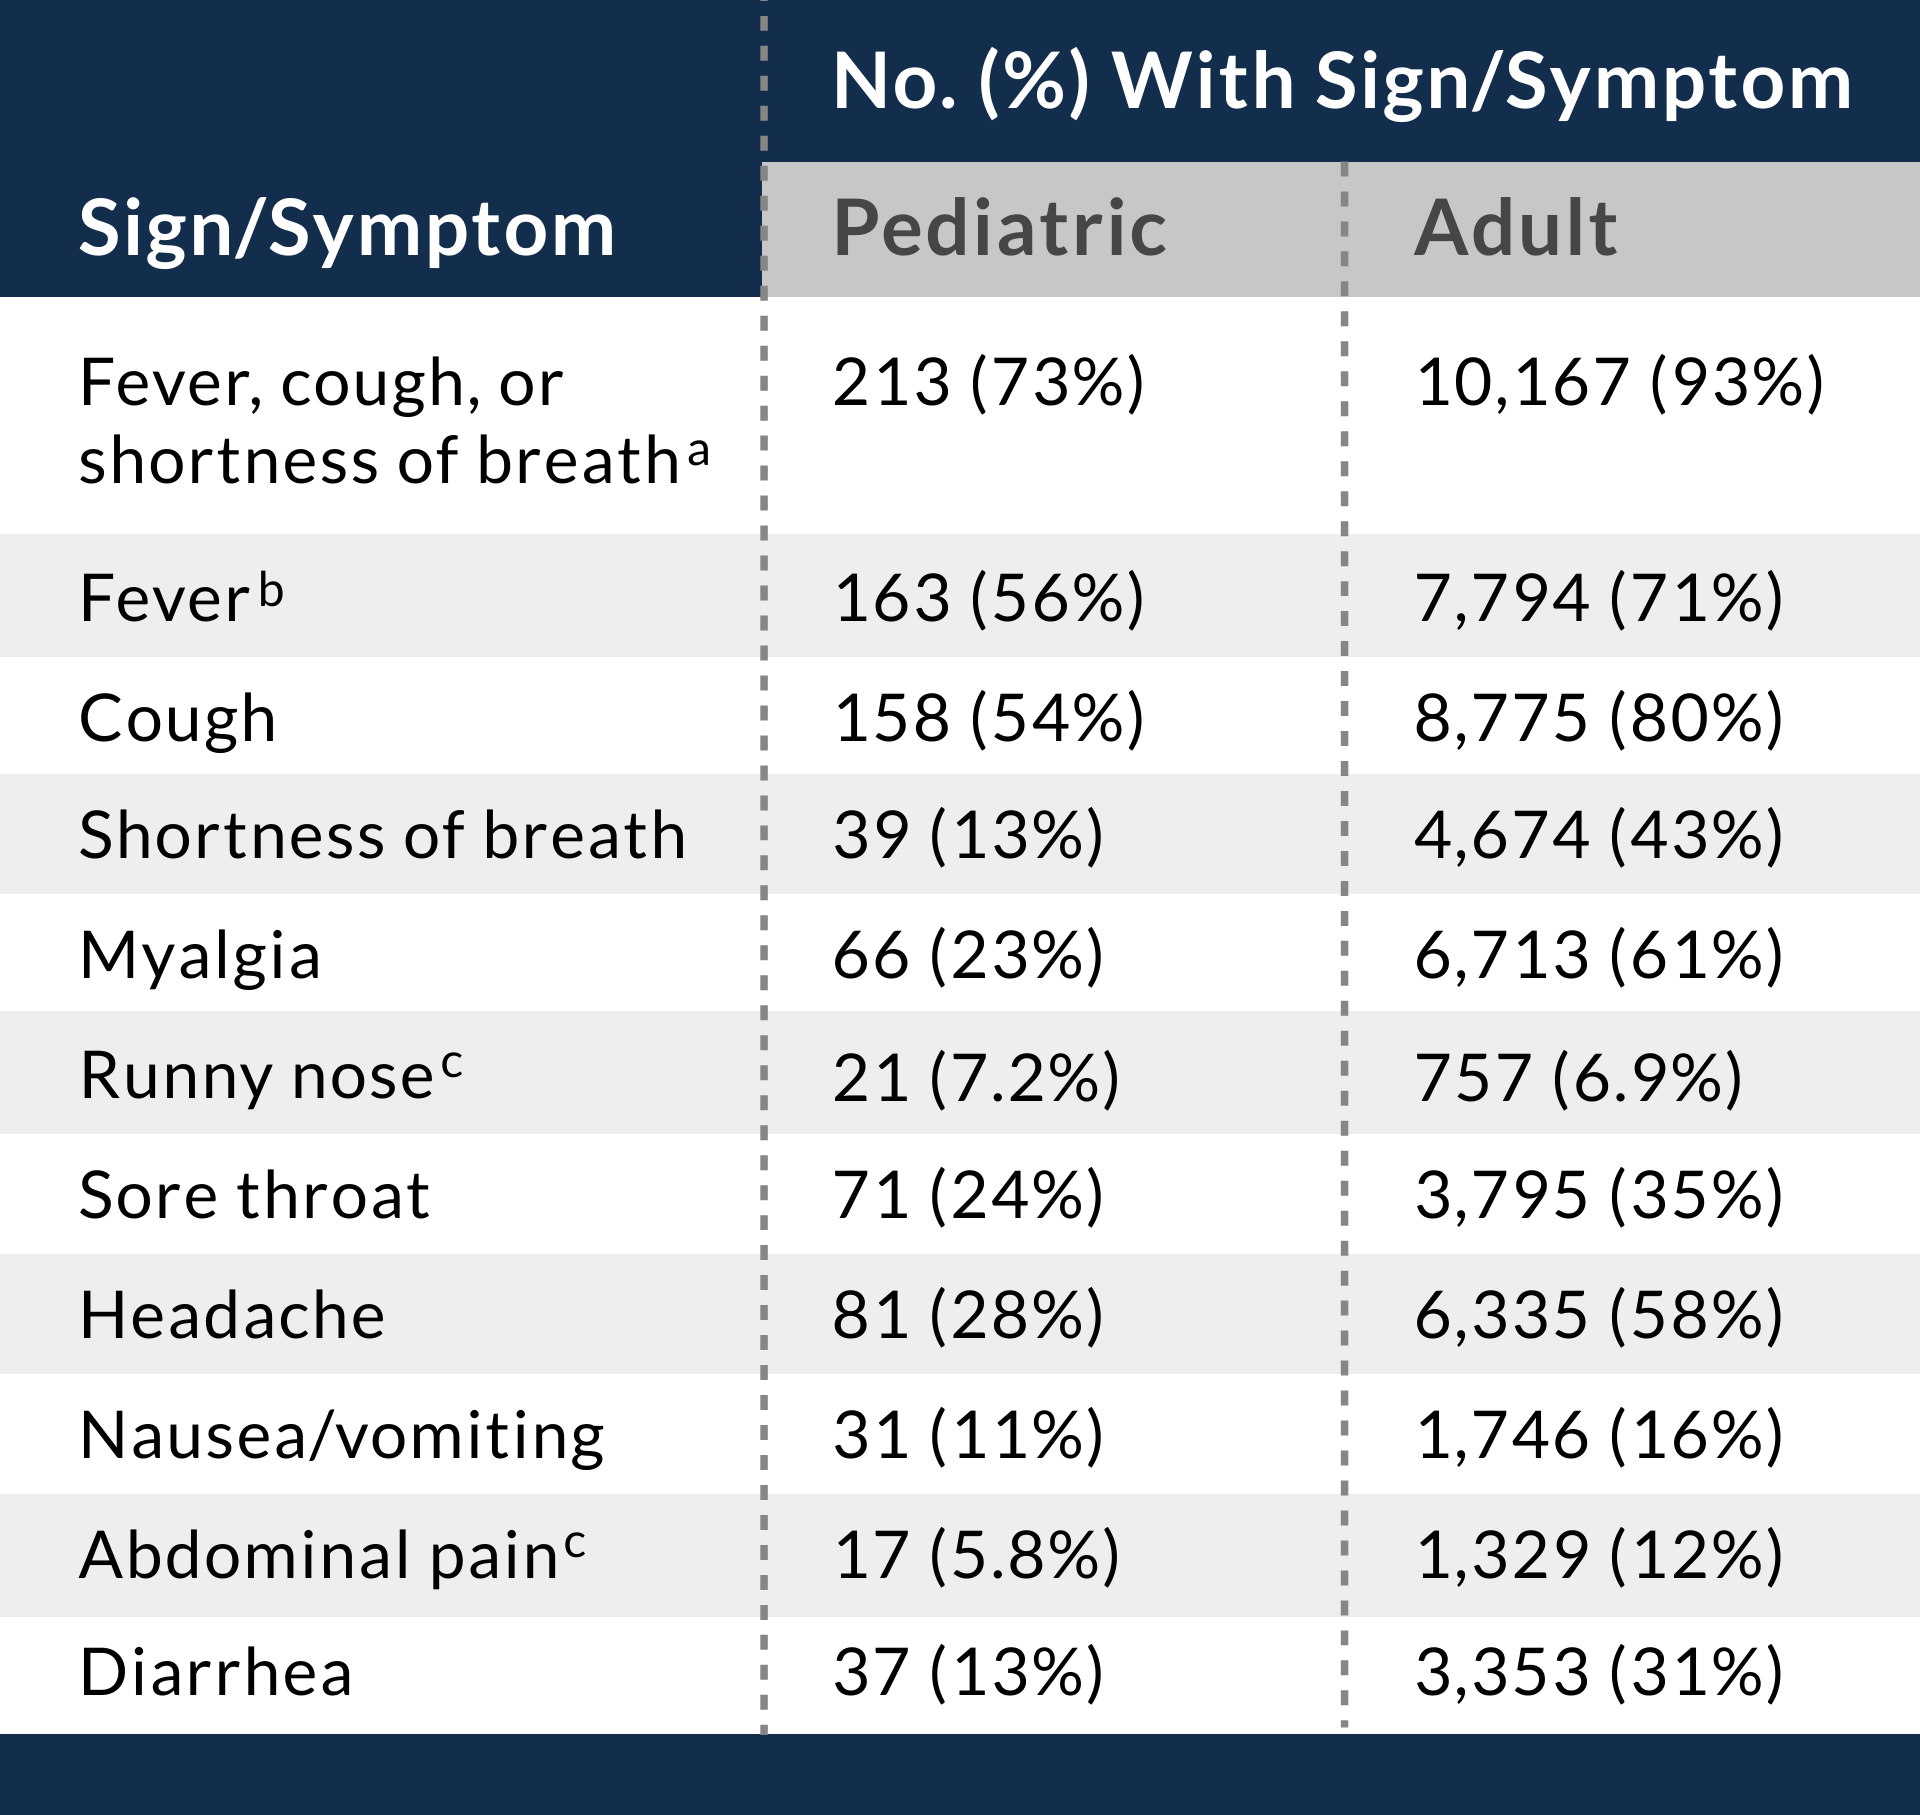 table_6.1_signs_and_symptoms.png